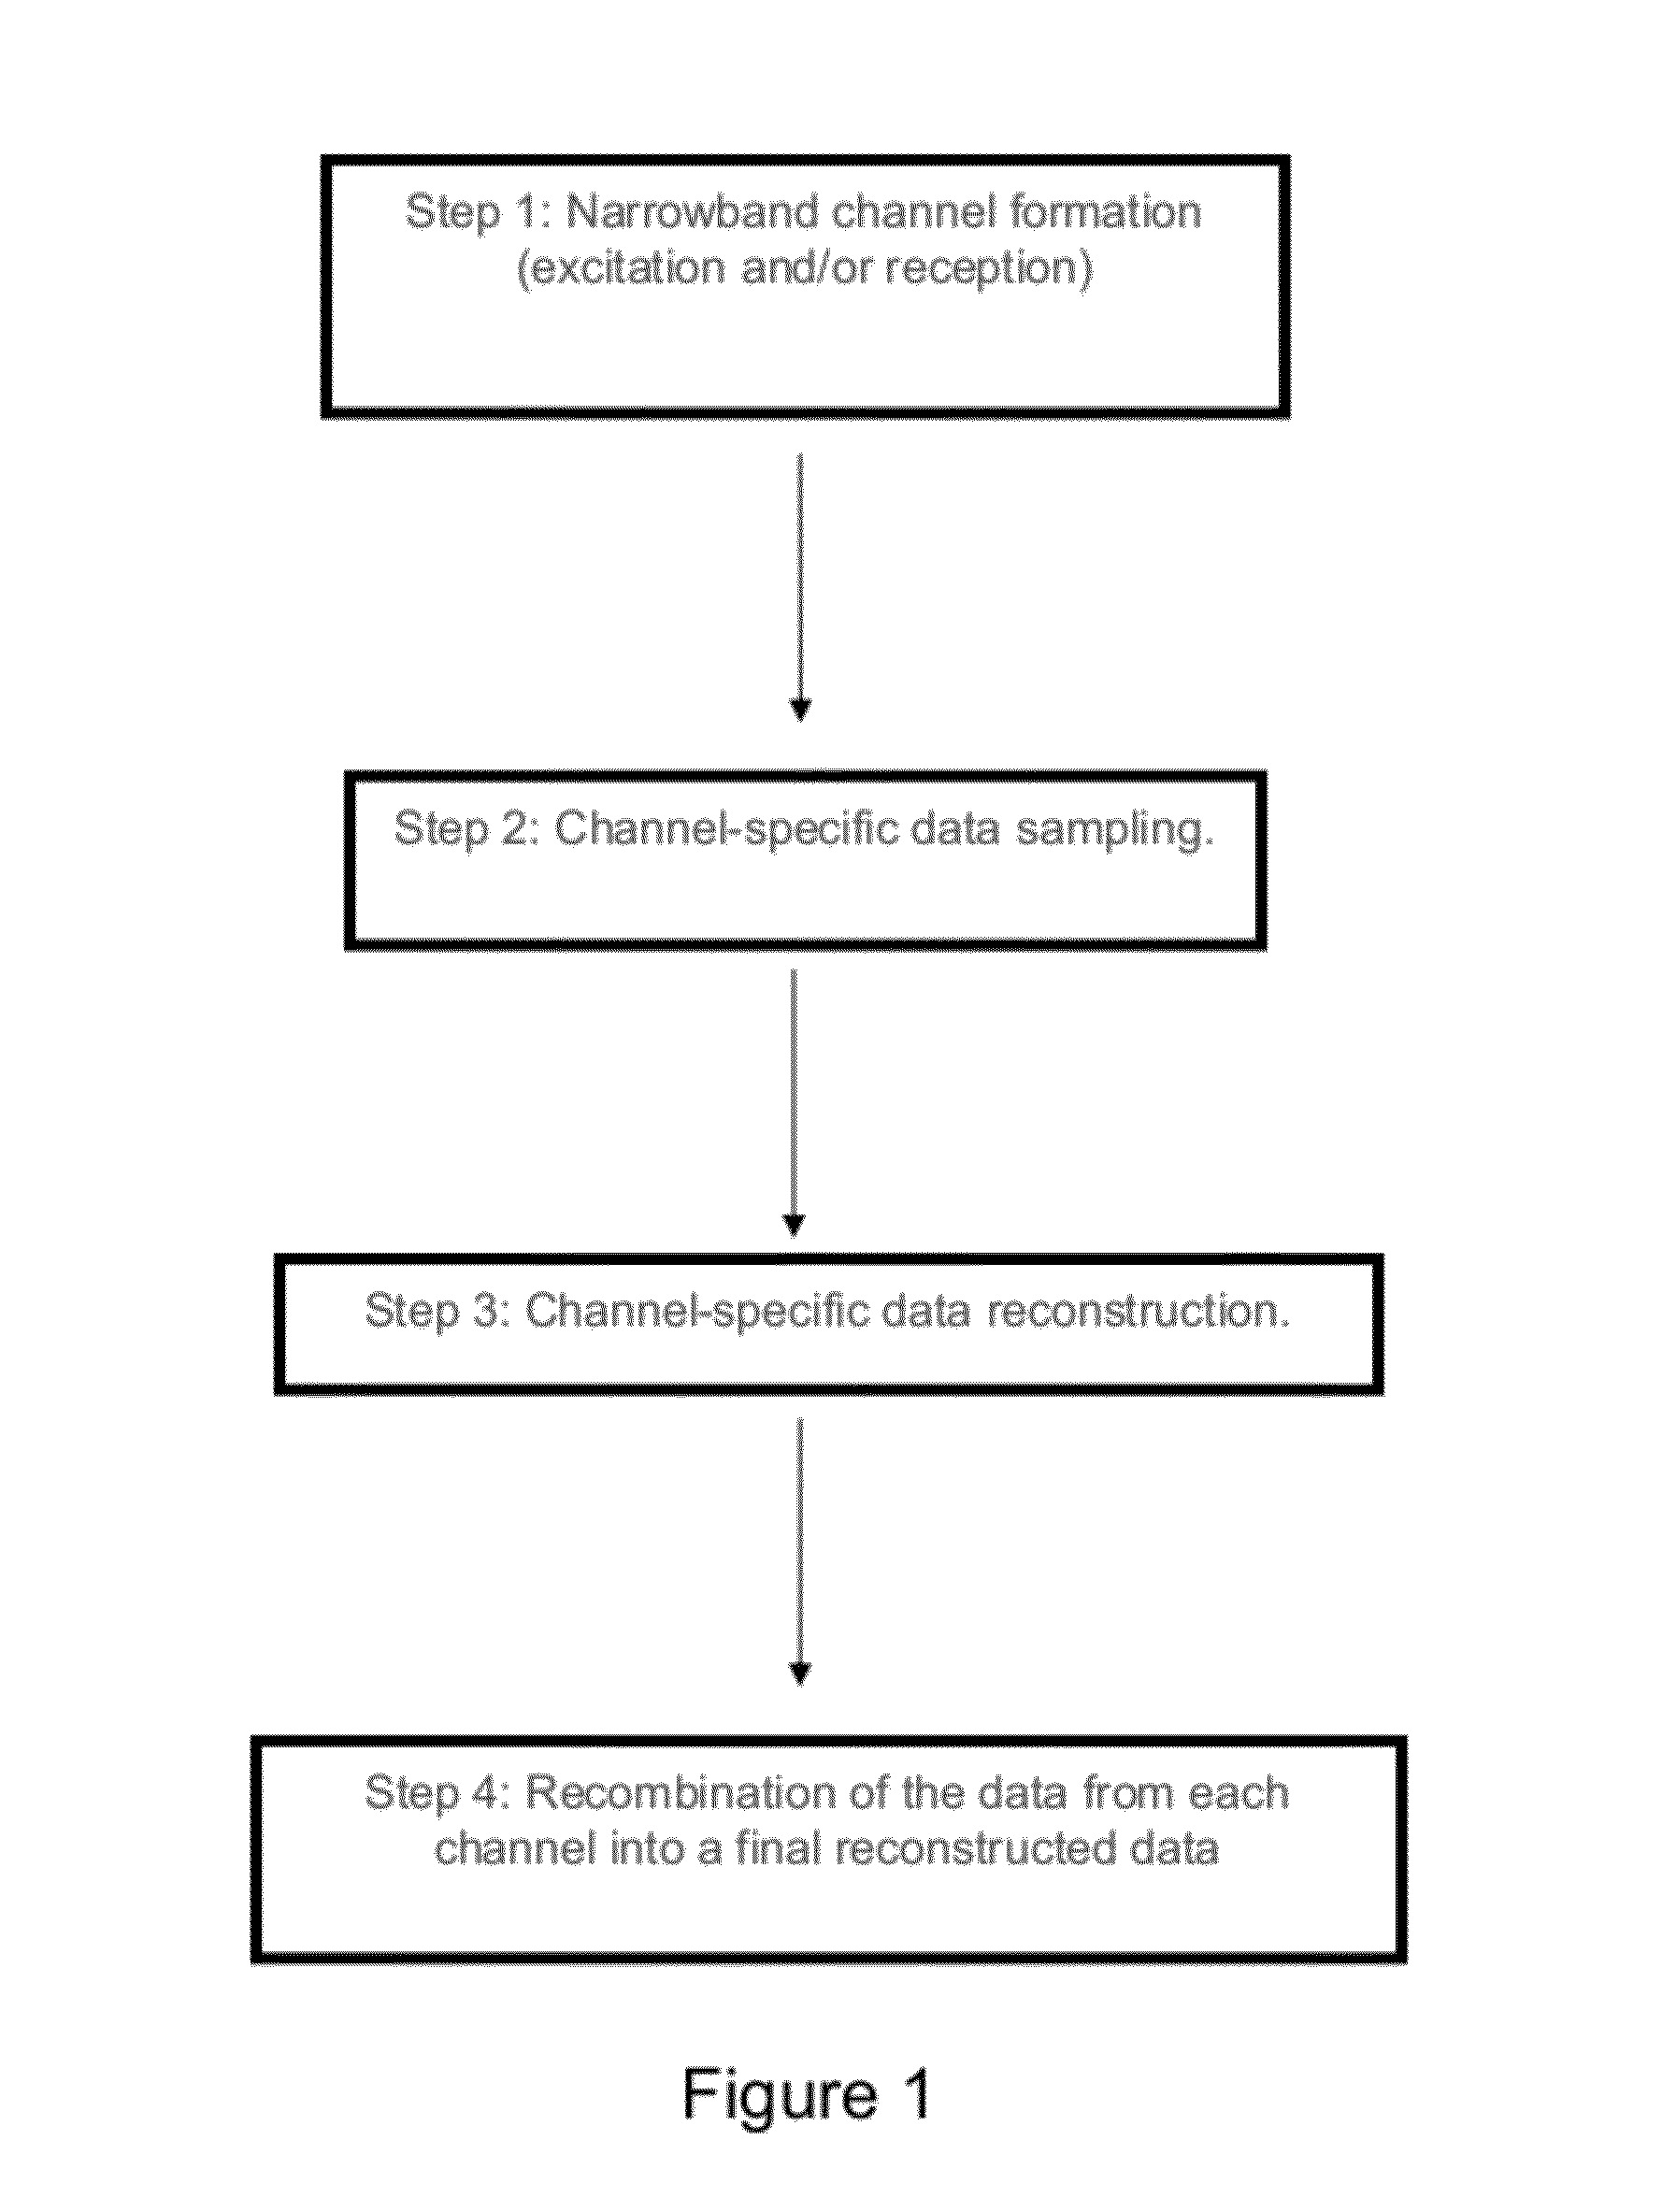 Noise reduction apparatus, systems, and methods